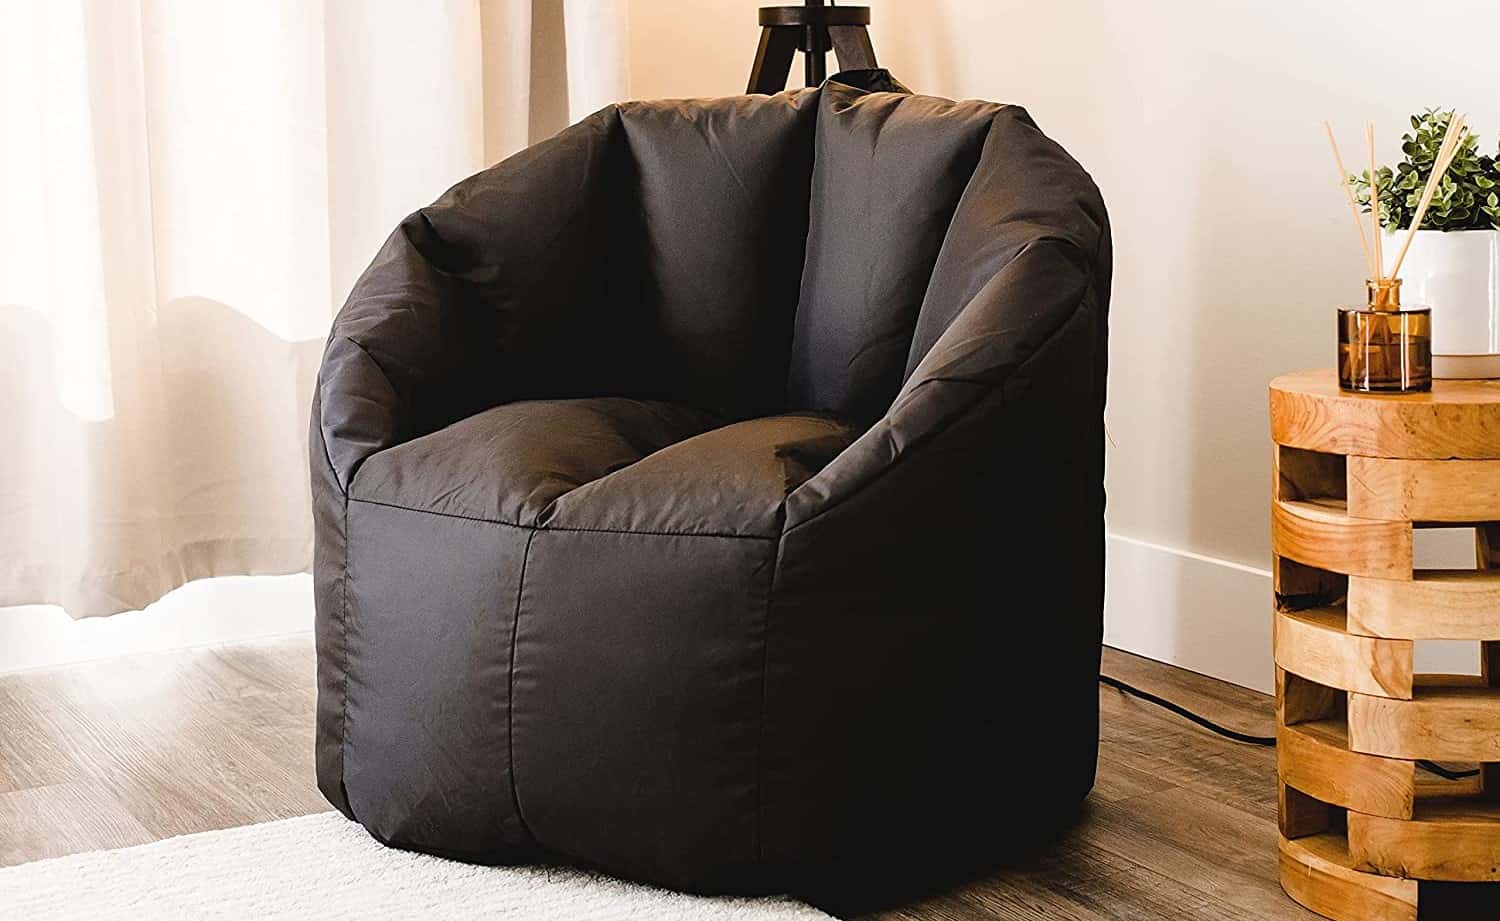 Best Bean Bag Chairs for Gaming in 2023